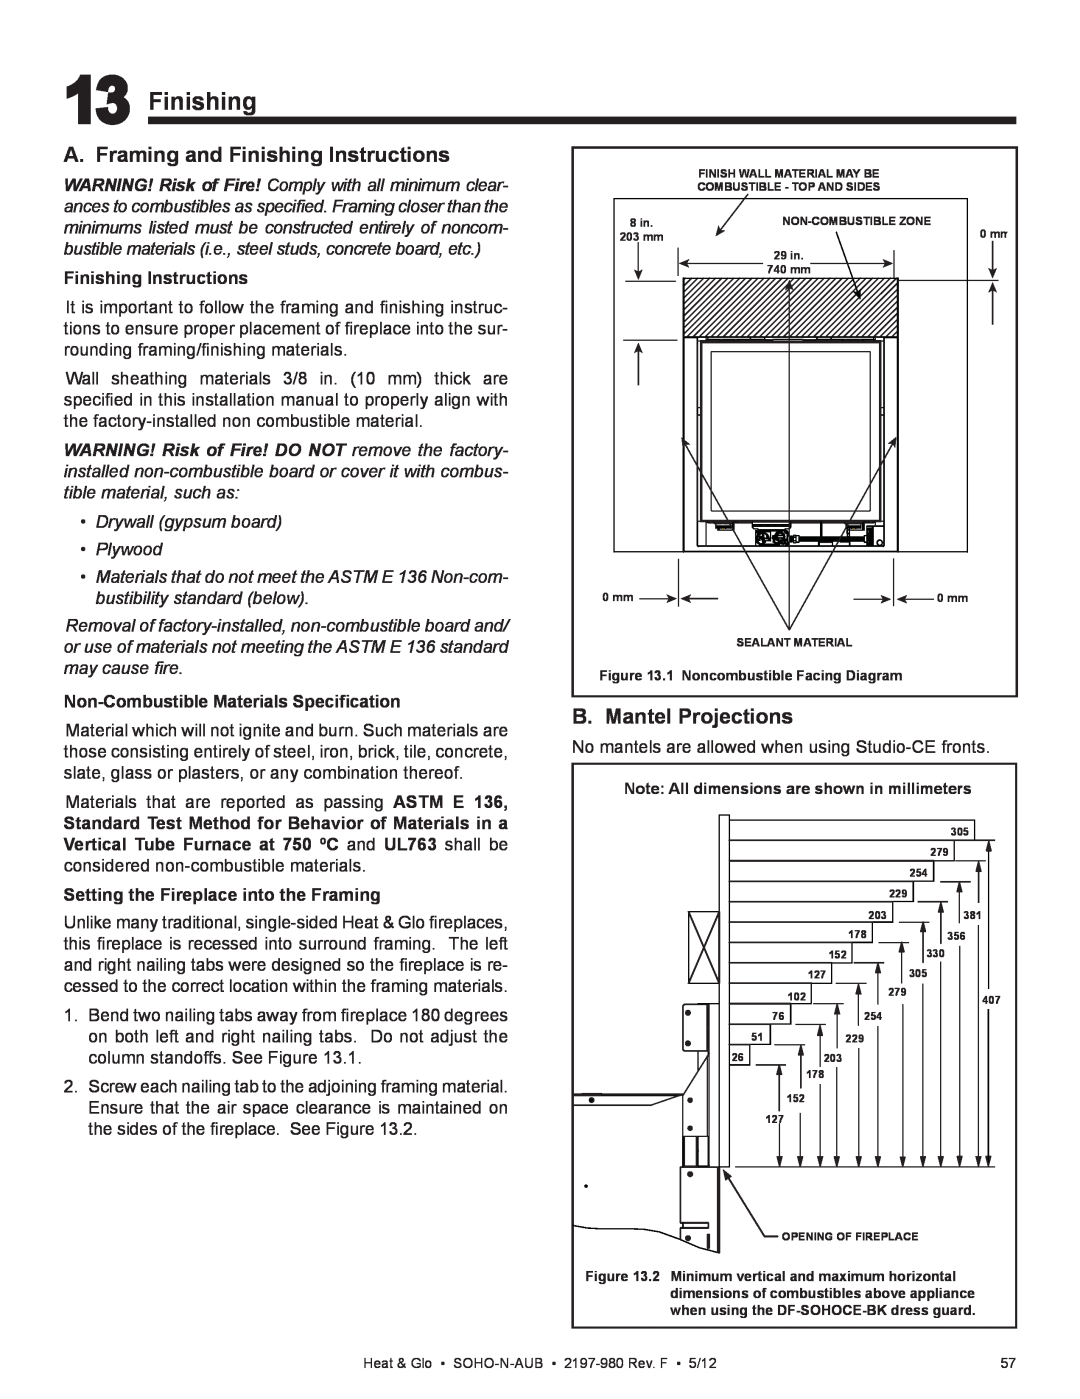 Heat & Glo LifeStyle 2197-980 owner manual A. Framing and Finishing Instructions, B. Mantel Projections 